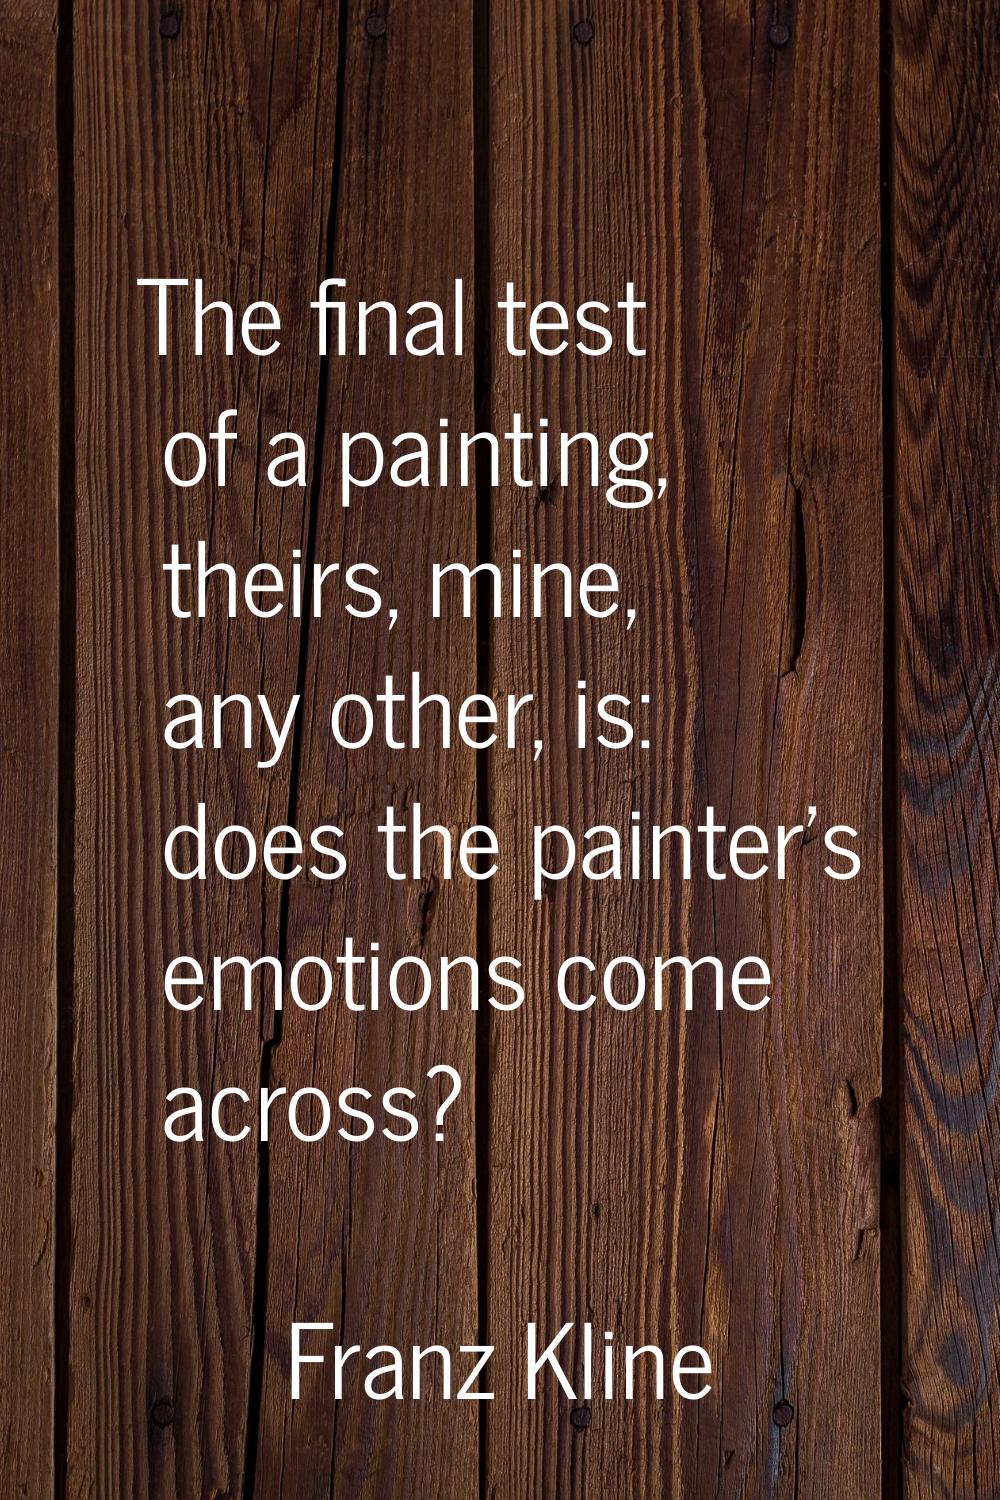 The final test of a painting, theirs, mine, any other, is: does the painter's emotions come across?